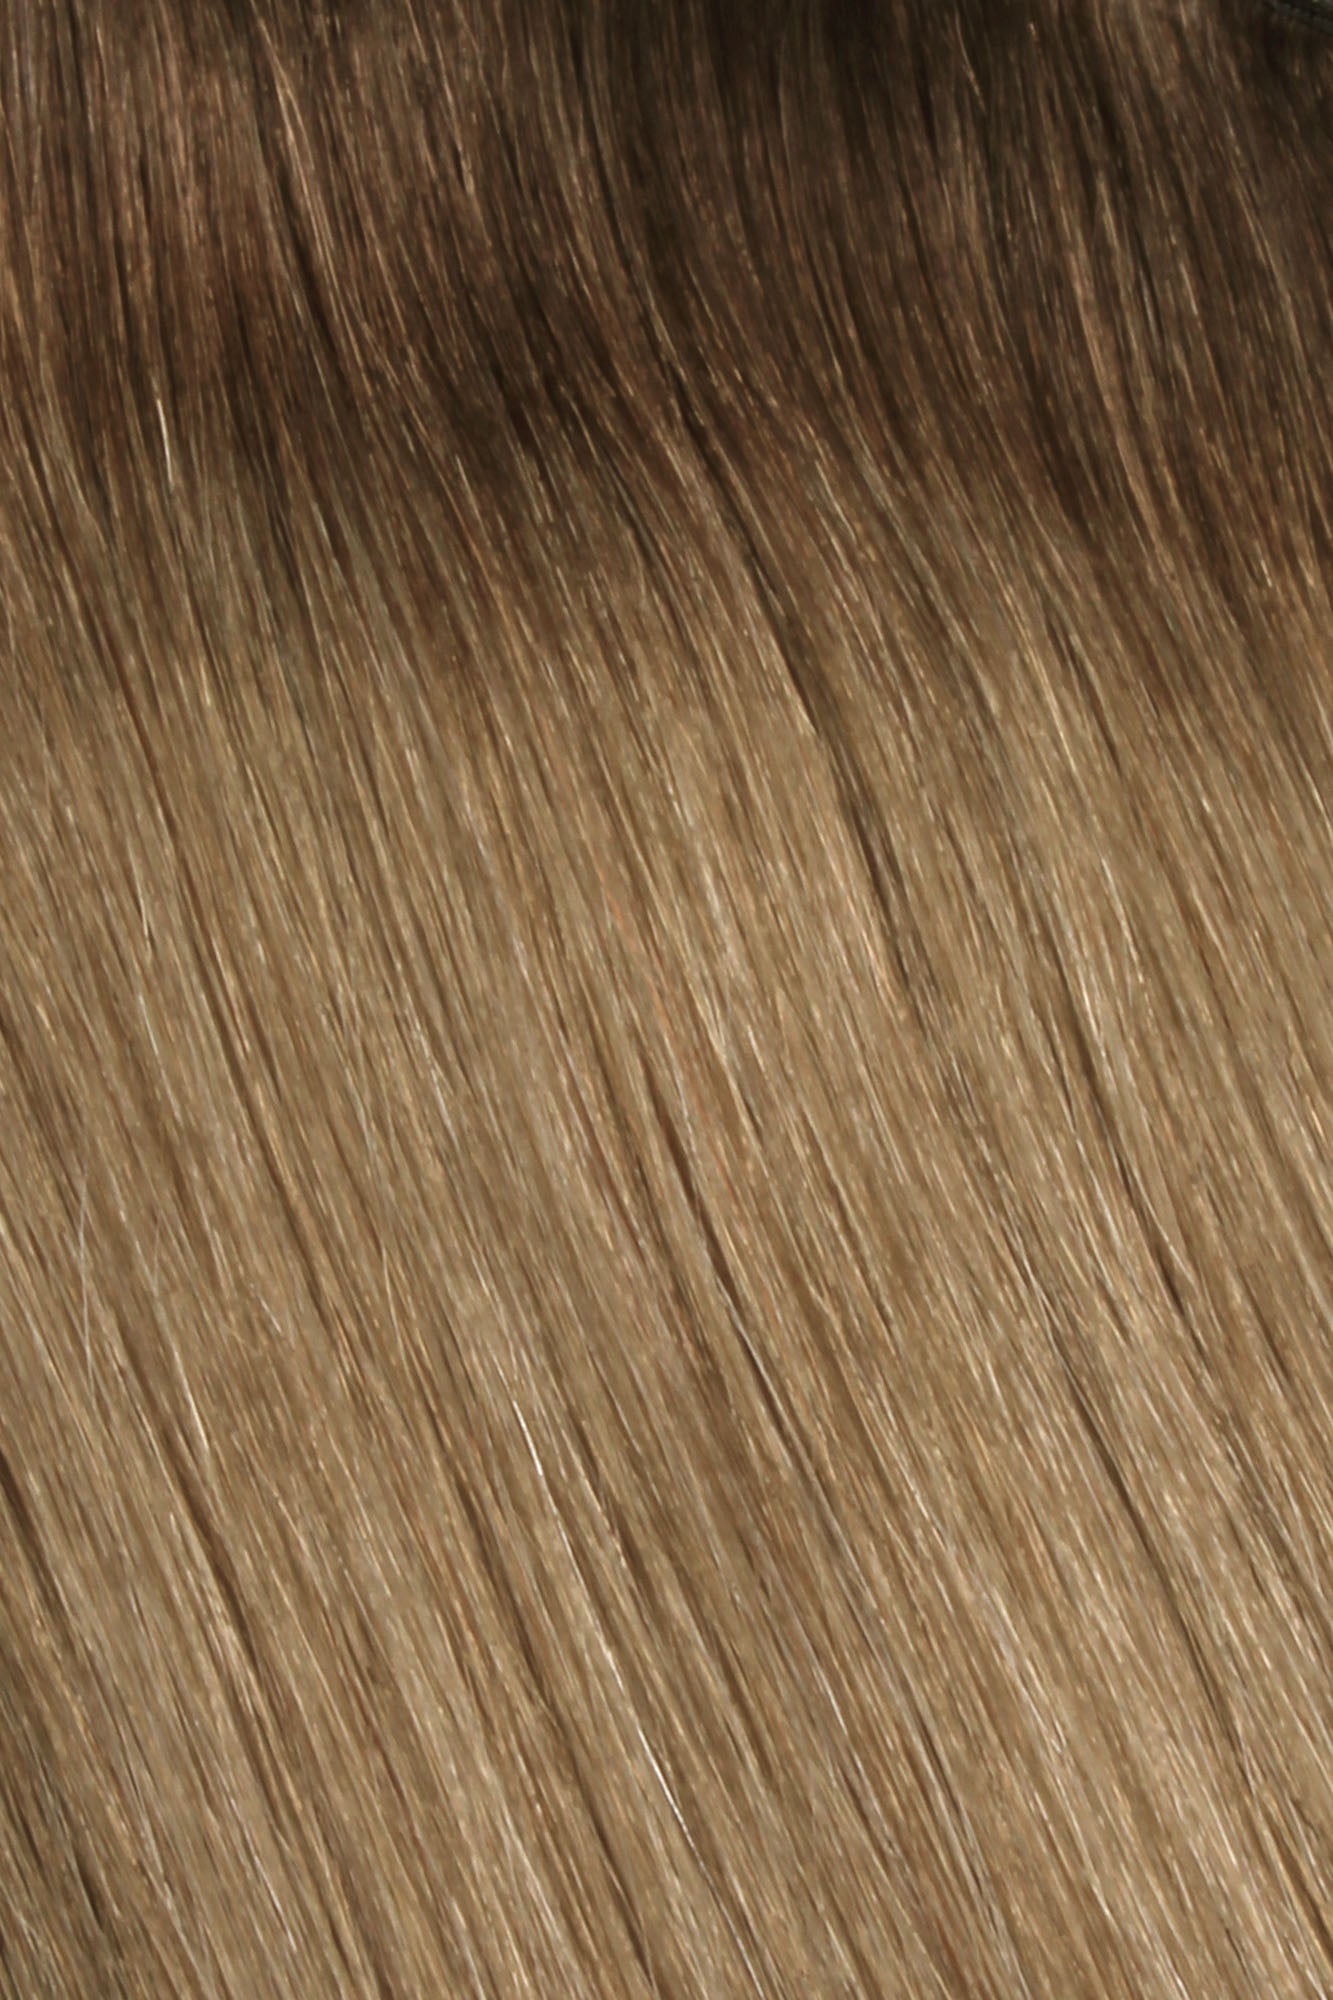 SEAMLESS® Flat Weft 18 Inches - SWAY Hair Extensions Rooted-Champagne-Chestnut-R5-8-22 Natural SEAMLESS® Flat Weft 18 Inches extensions. Thin, flexible, and discreet. 100% Double Drawn Remy Human Hair. Versatile and reusable